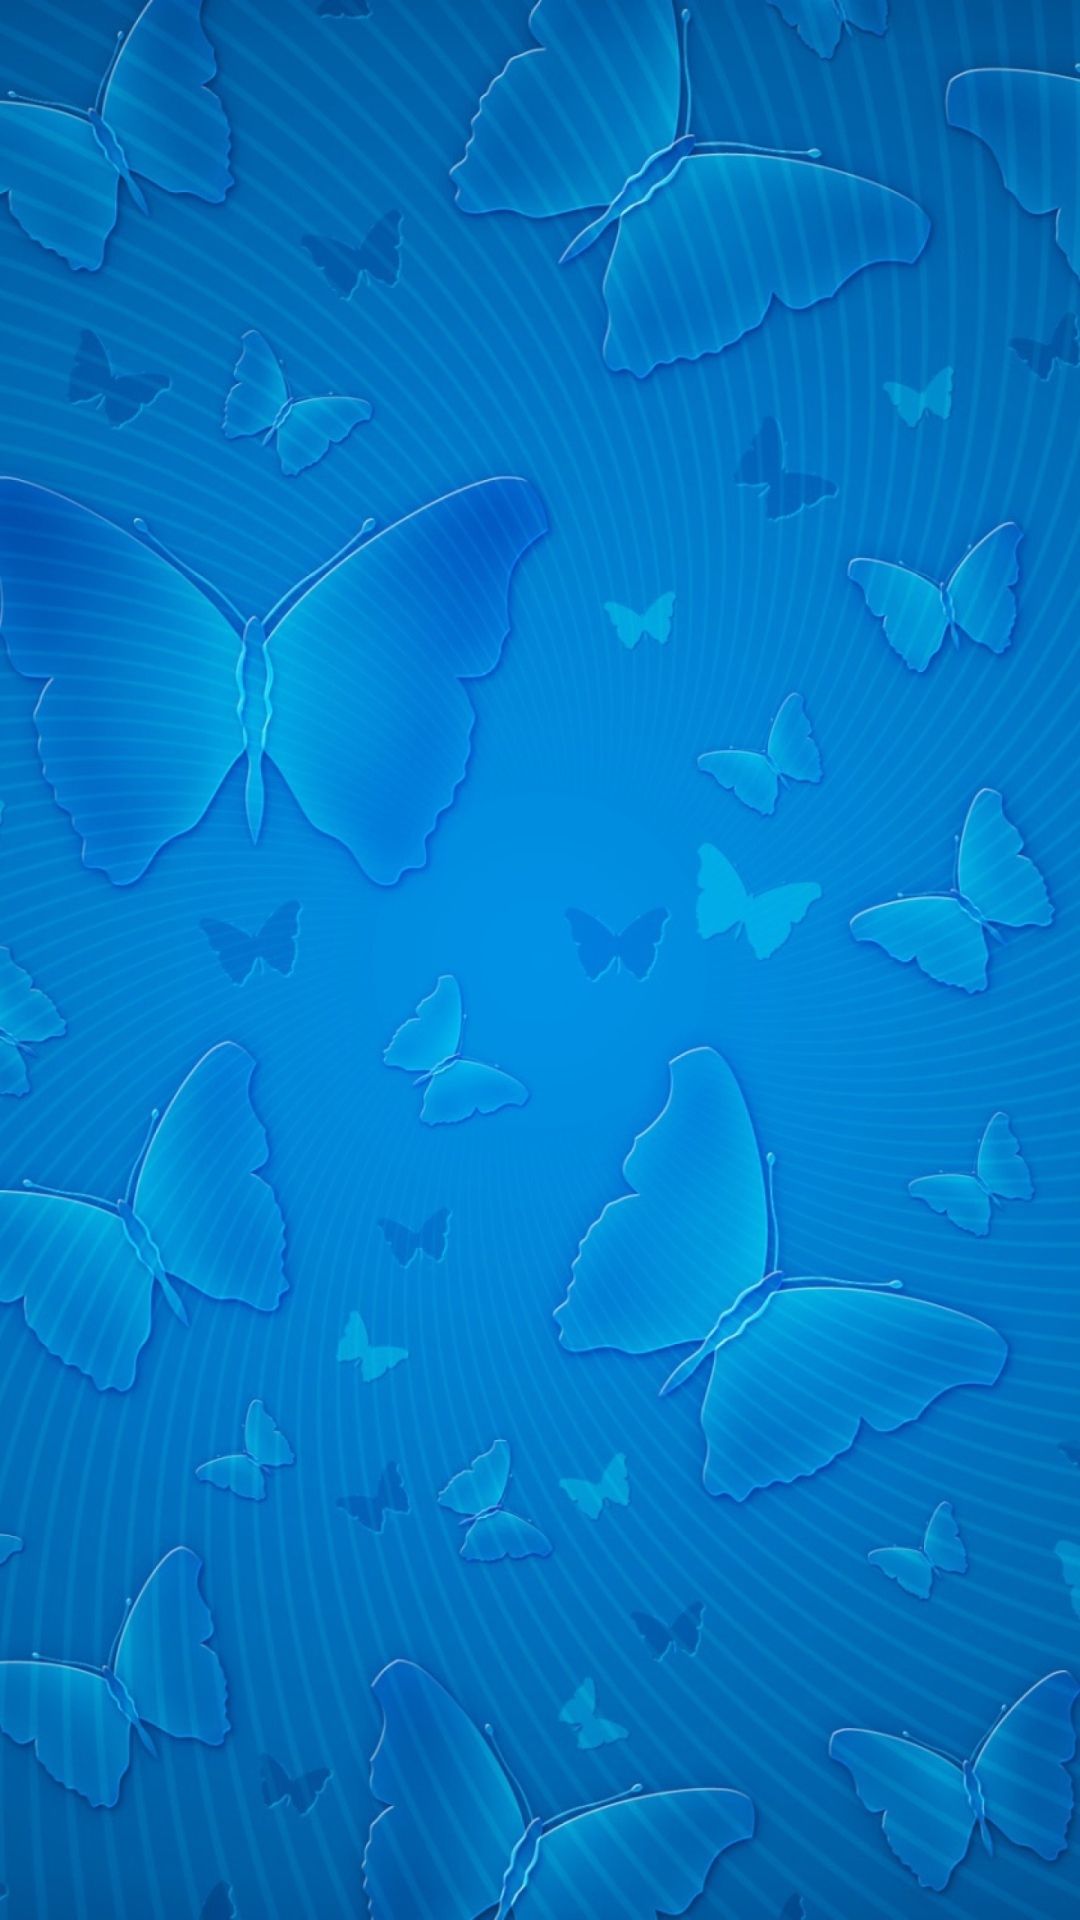 Iphone Butterfly Emoji Wallpapers